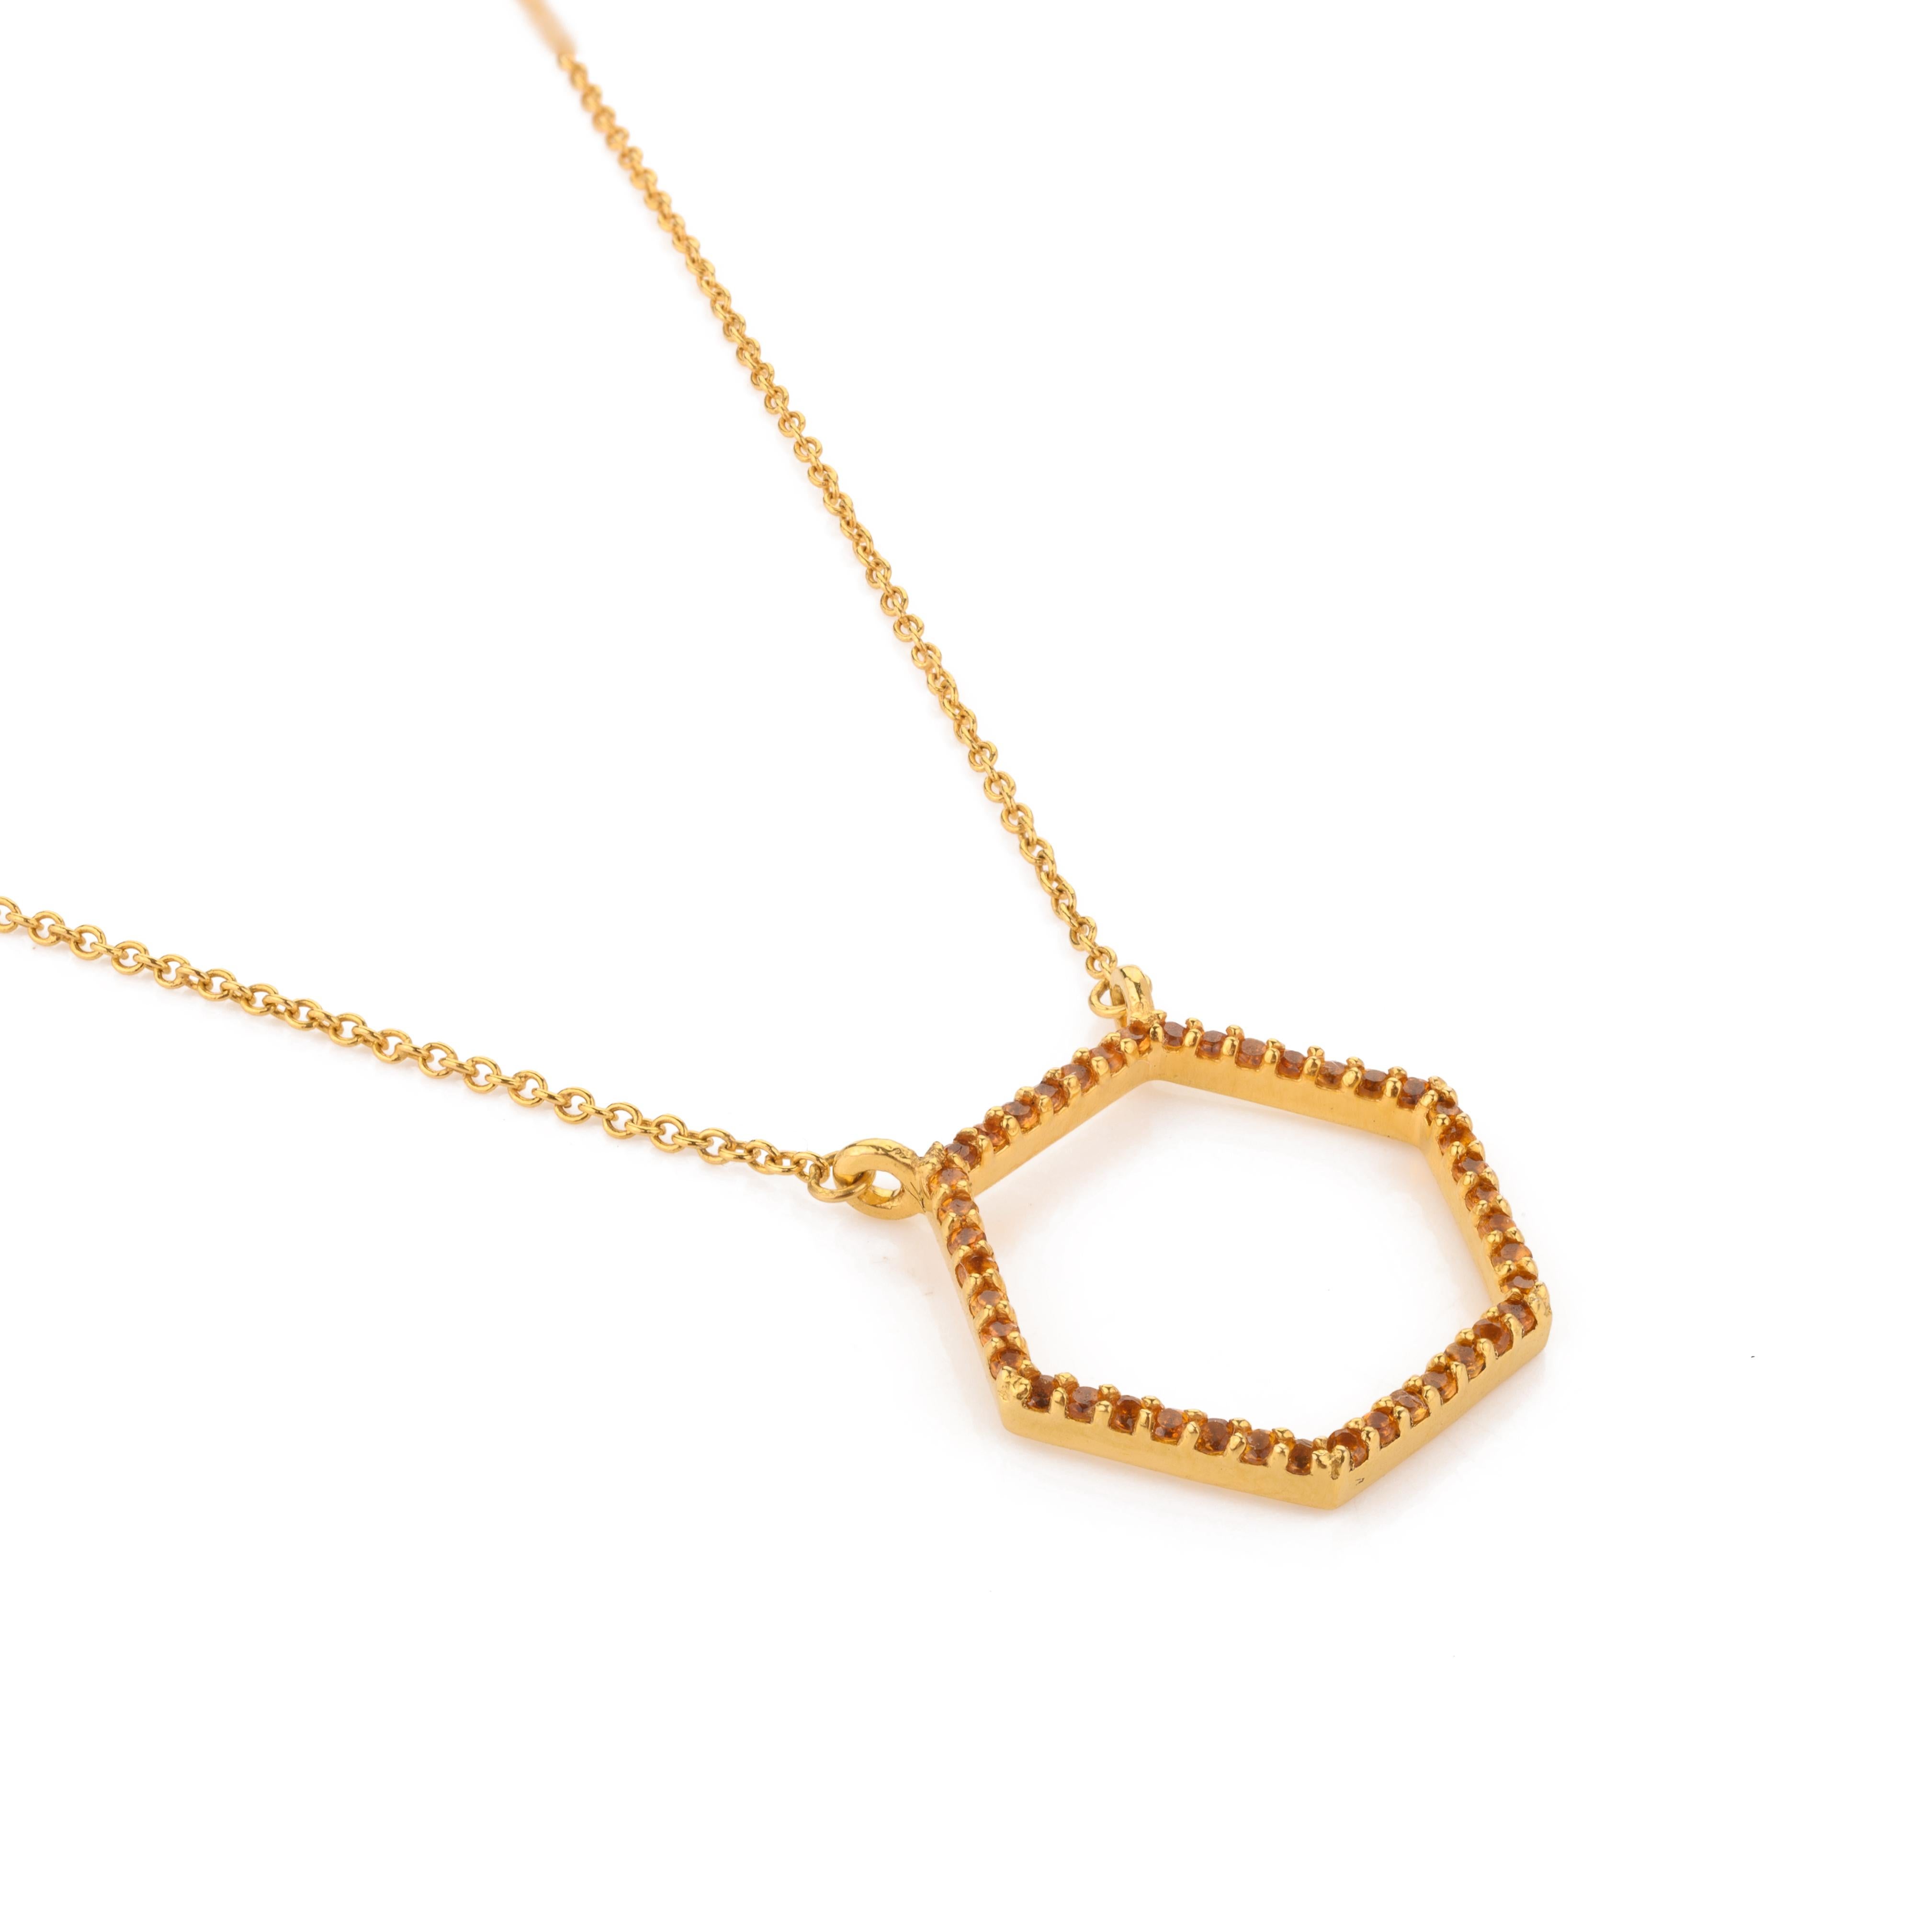 Modern 14k Solid Yellow Gold Citrine Hexagon Pendant Necklace Gift For Her For Sale